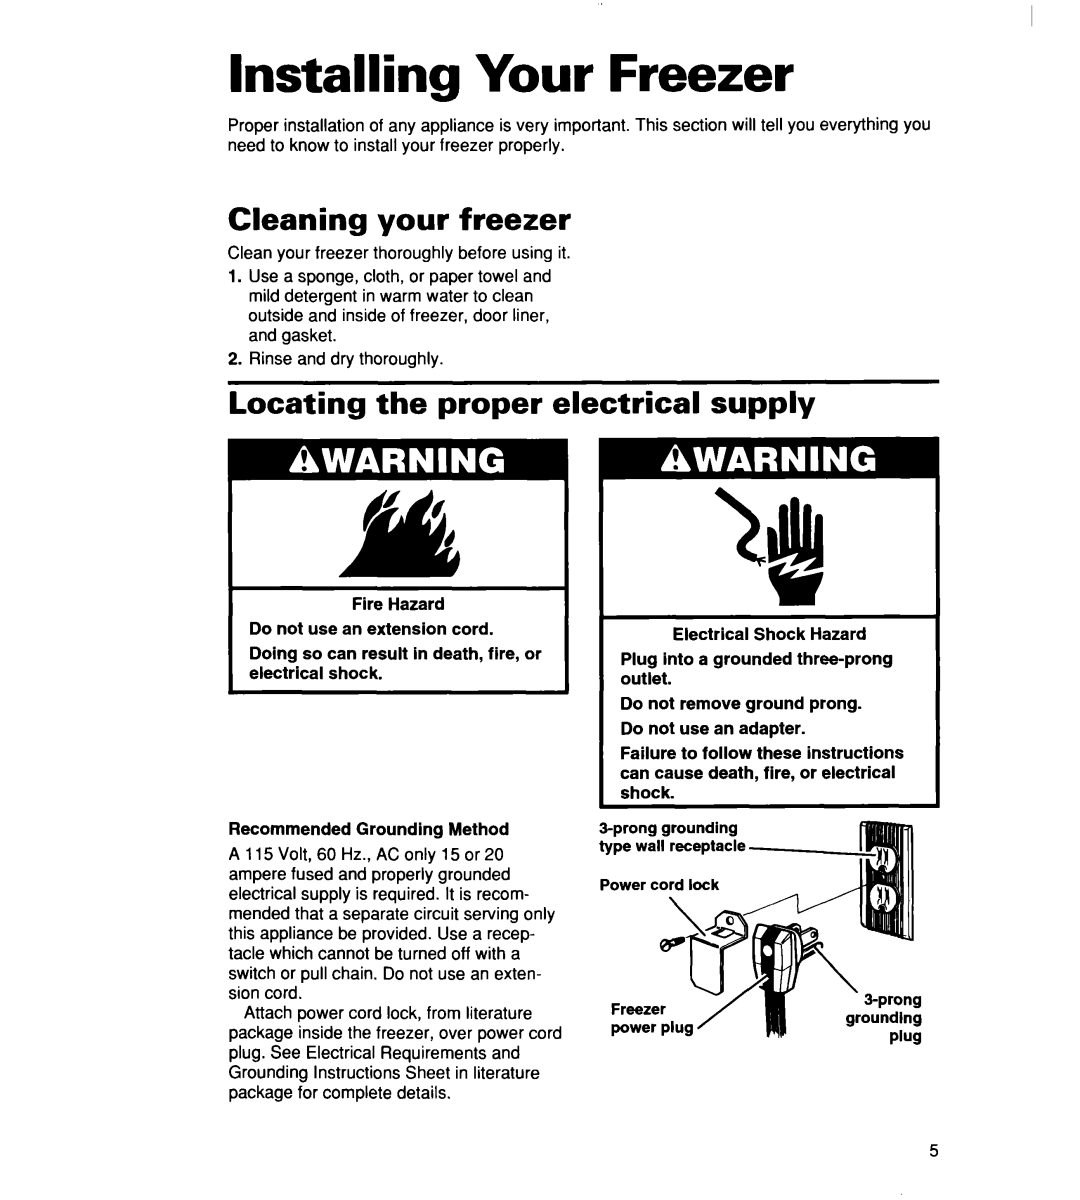 Whirlpool 2165306 warranty Installing Your Freezer, Cleaning your freezer, Locating the proper electrical supply 